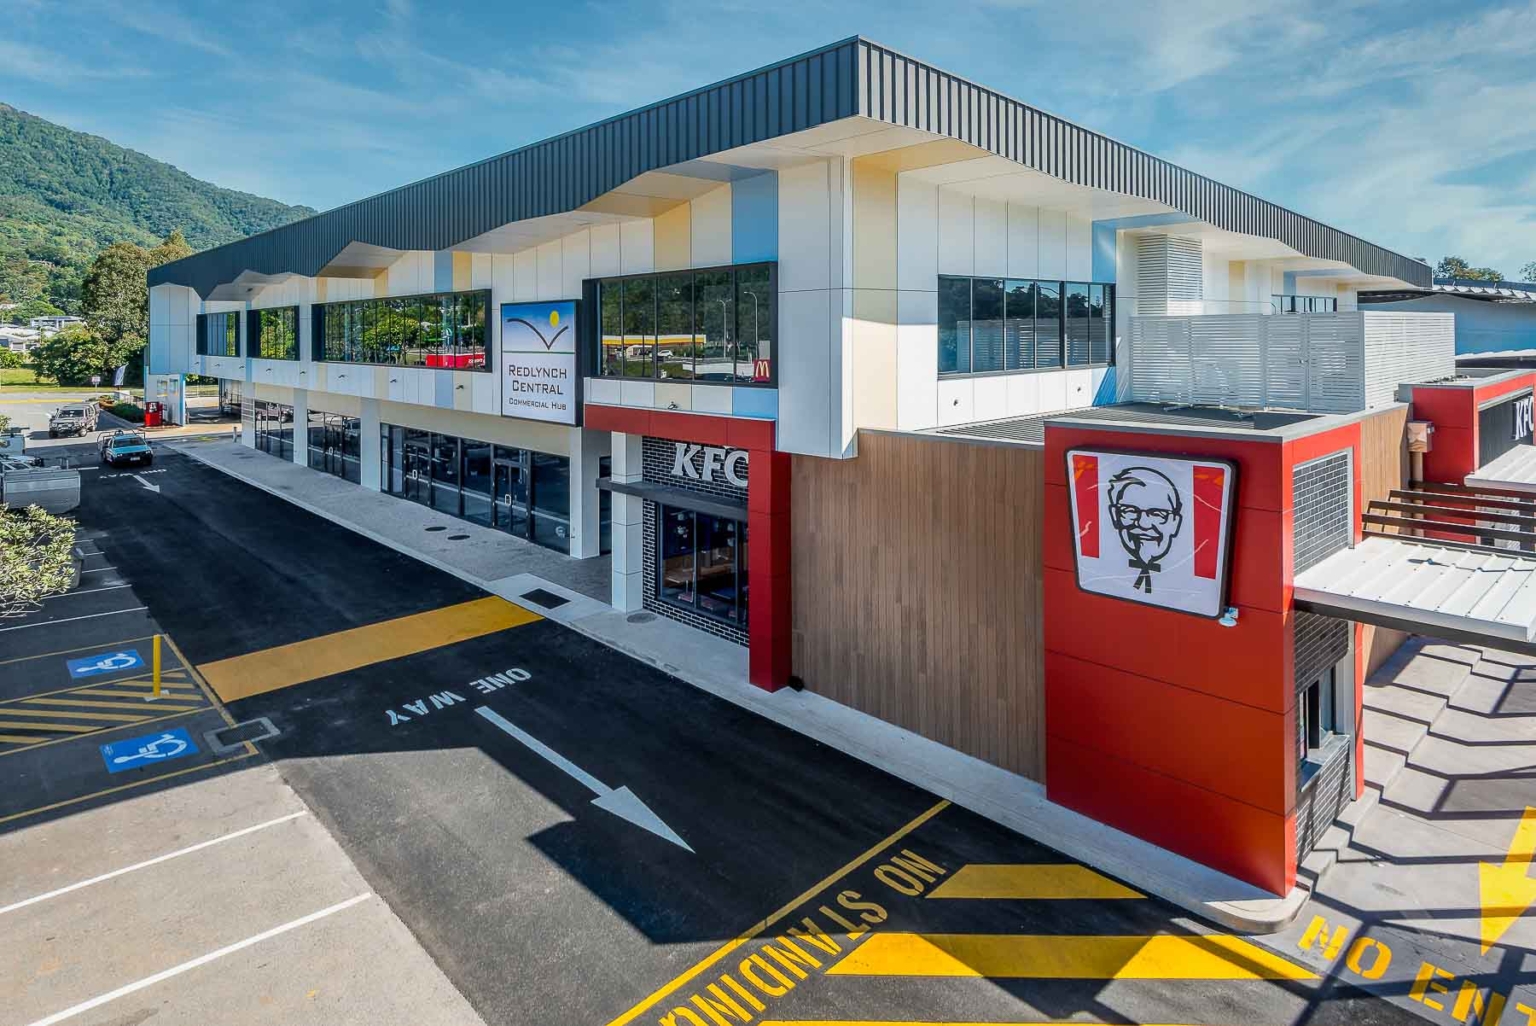 Redlynch Central Commercial Hub 20200729 Small 001 1536x1026 